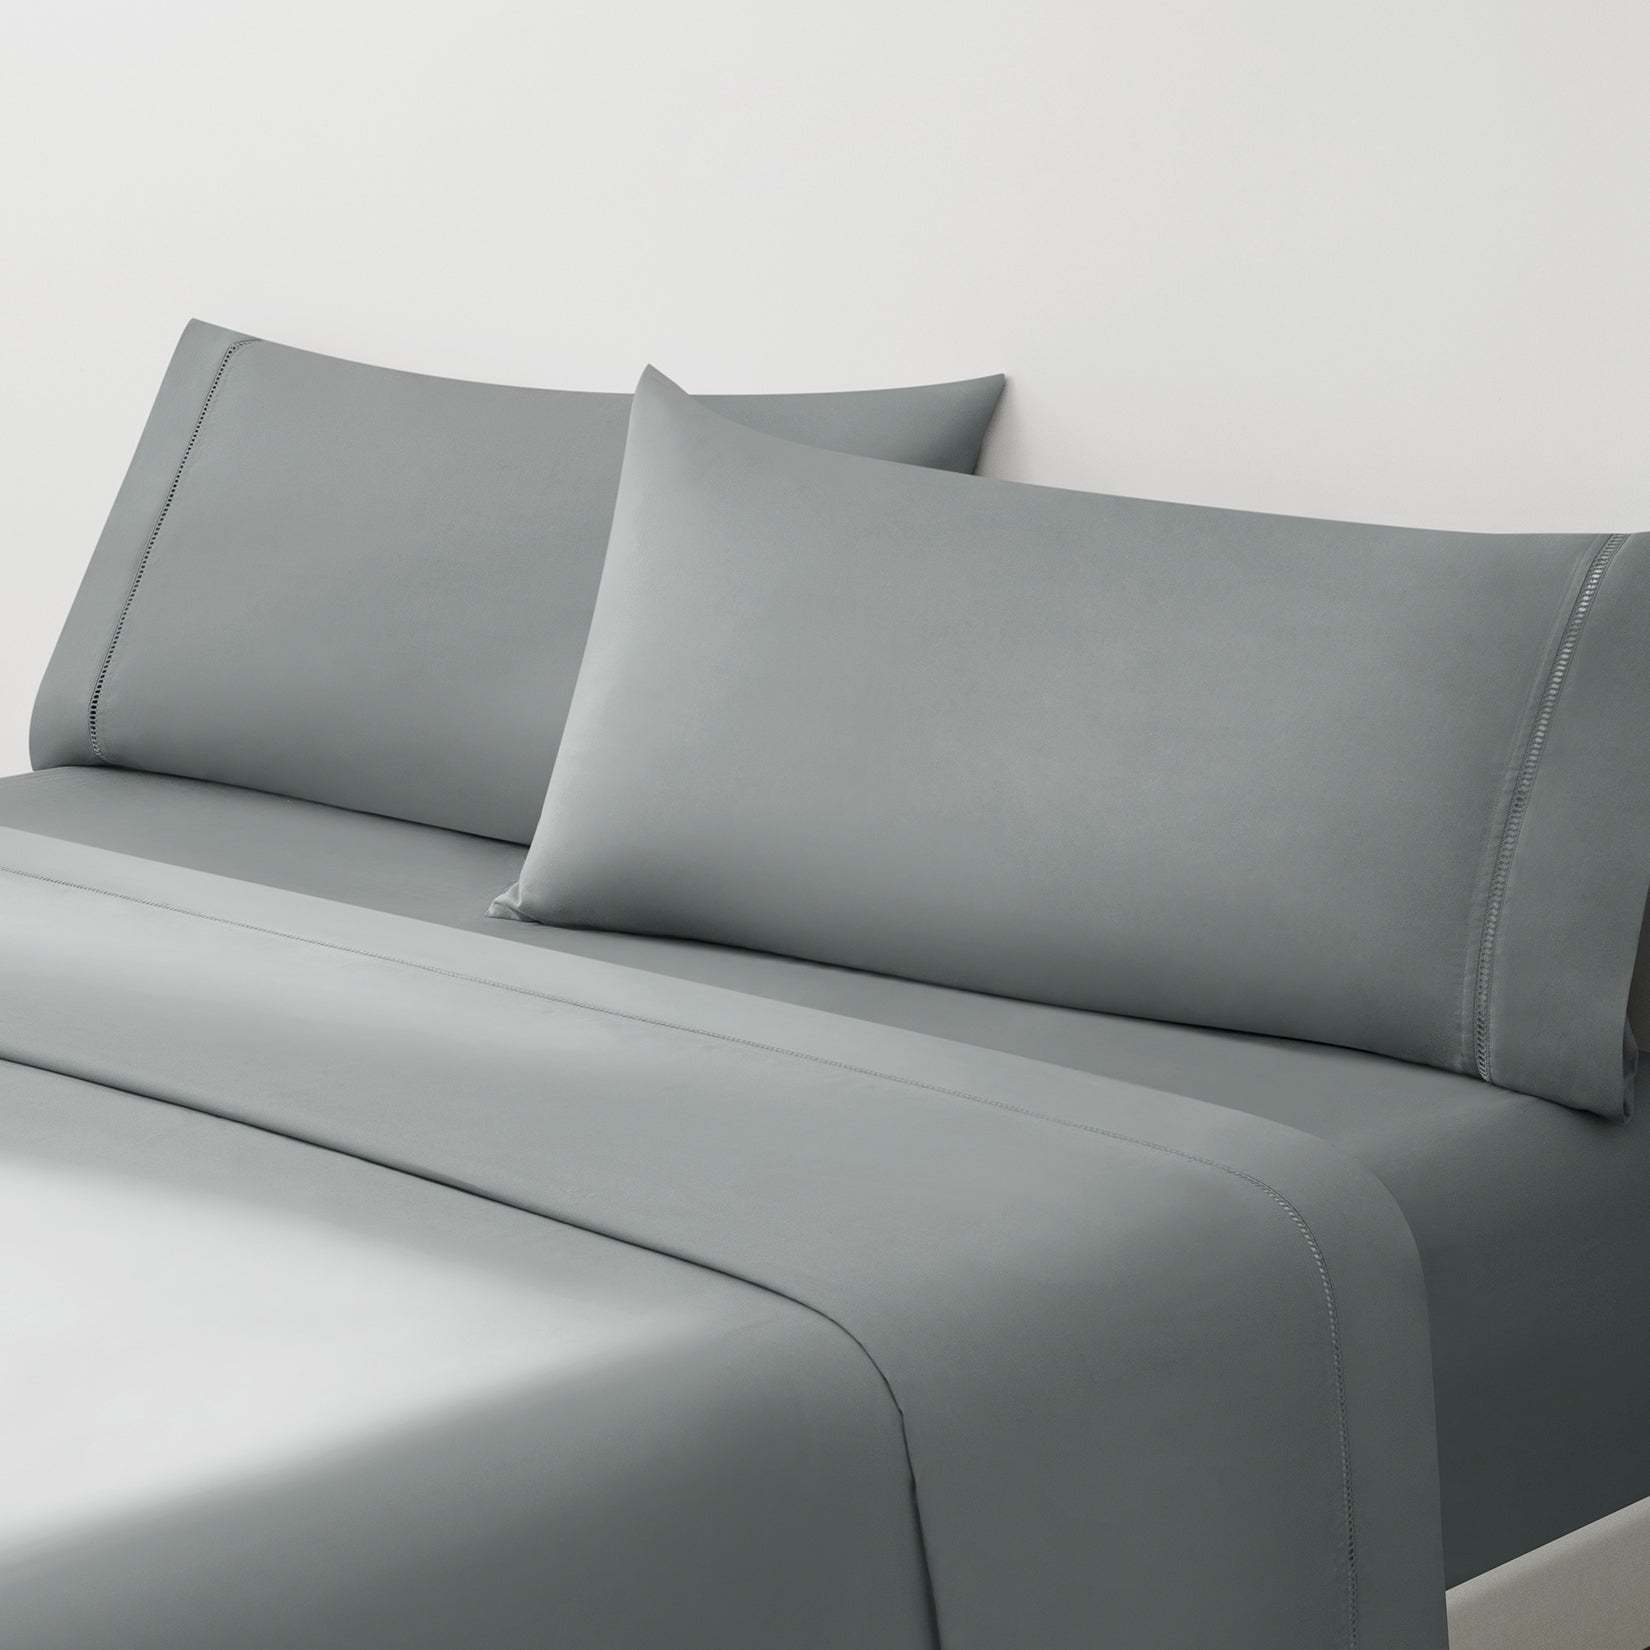 Camille Mid Gray bed set. Dark gray pillows and dark gray sheets on bed from side angle.